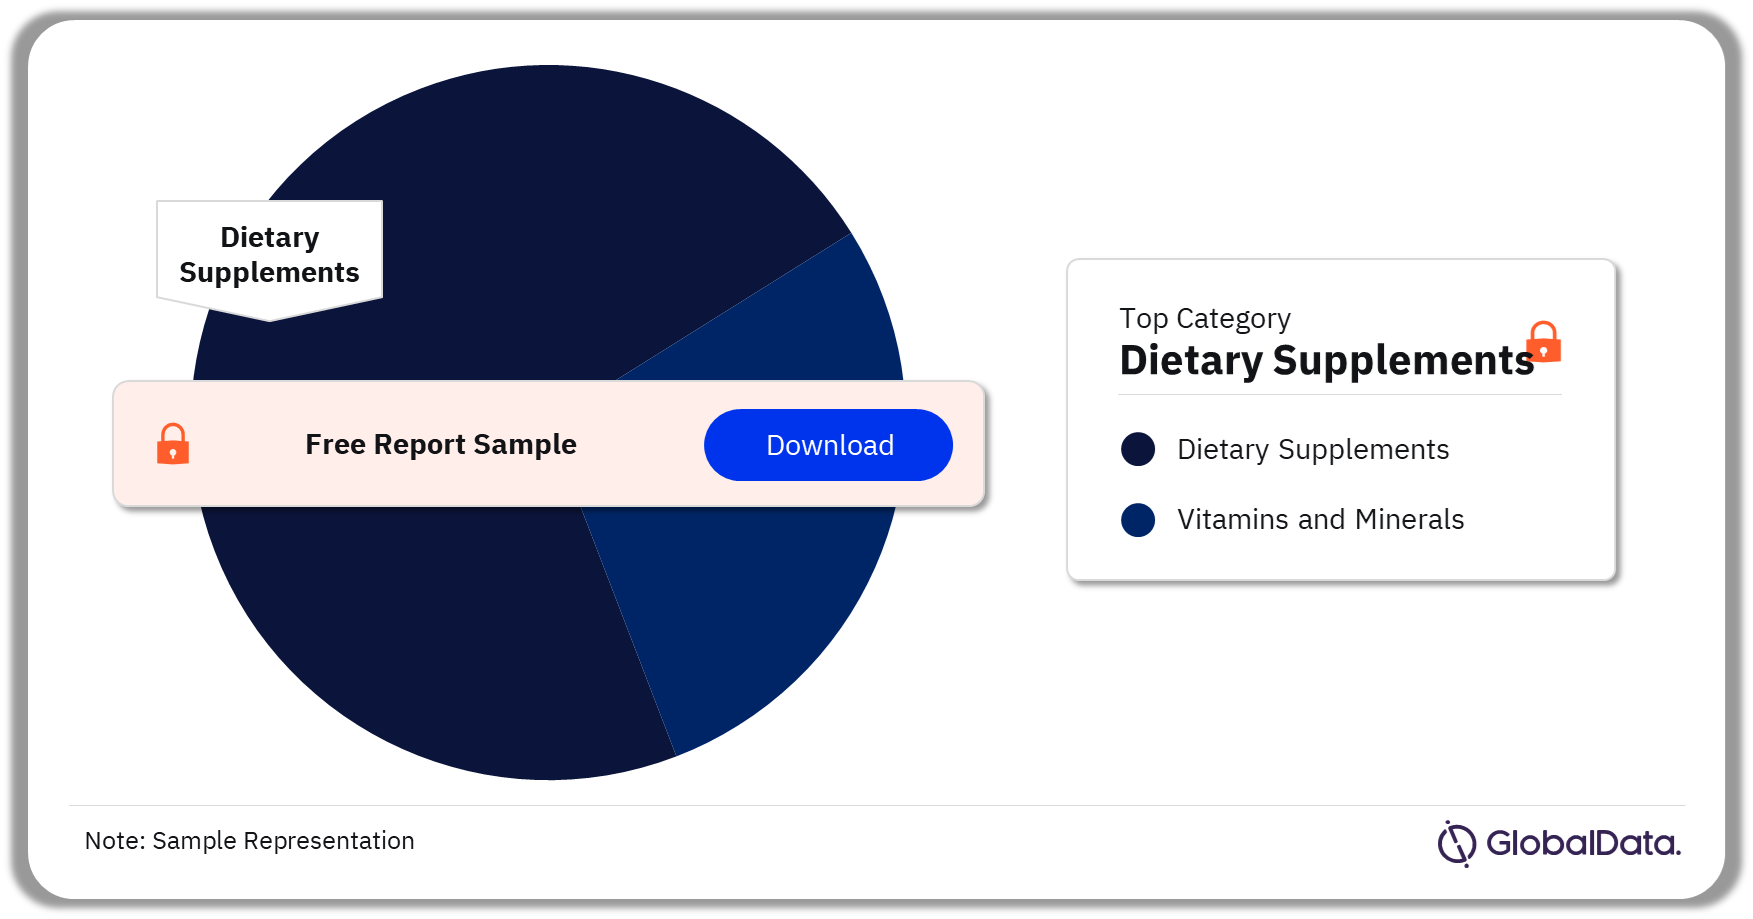 Vitamin and Dietary Supplements Market Analysis by Category, 2022 (%)